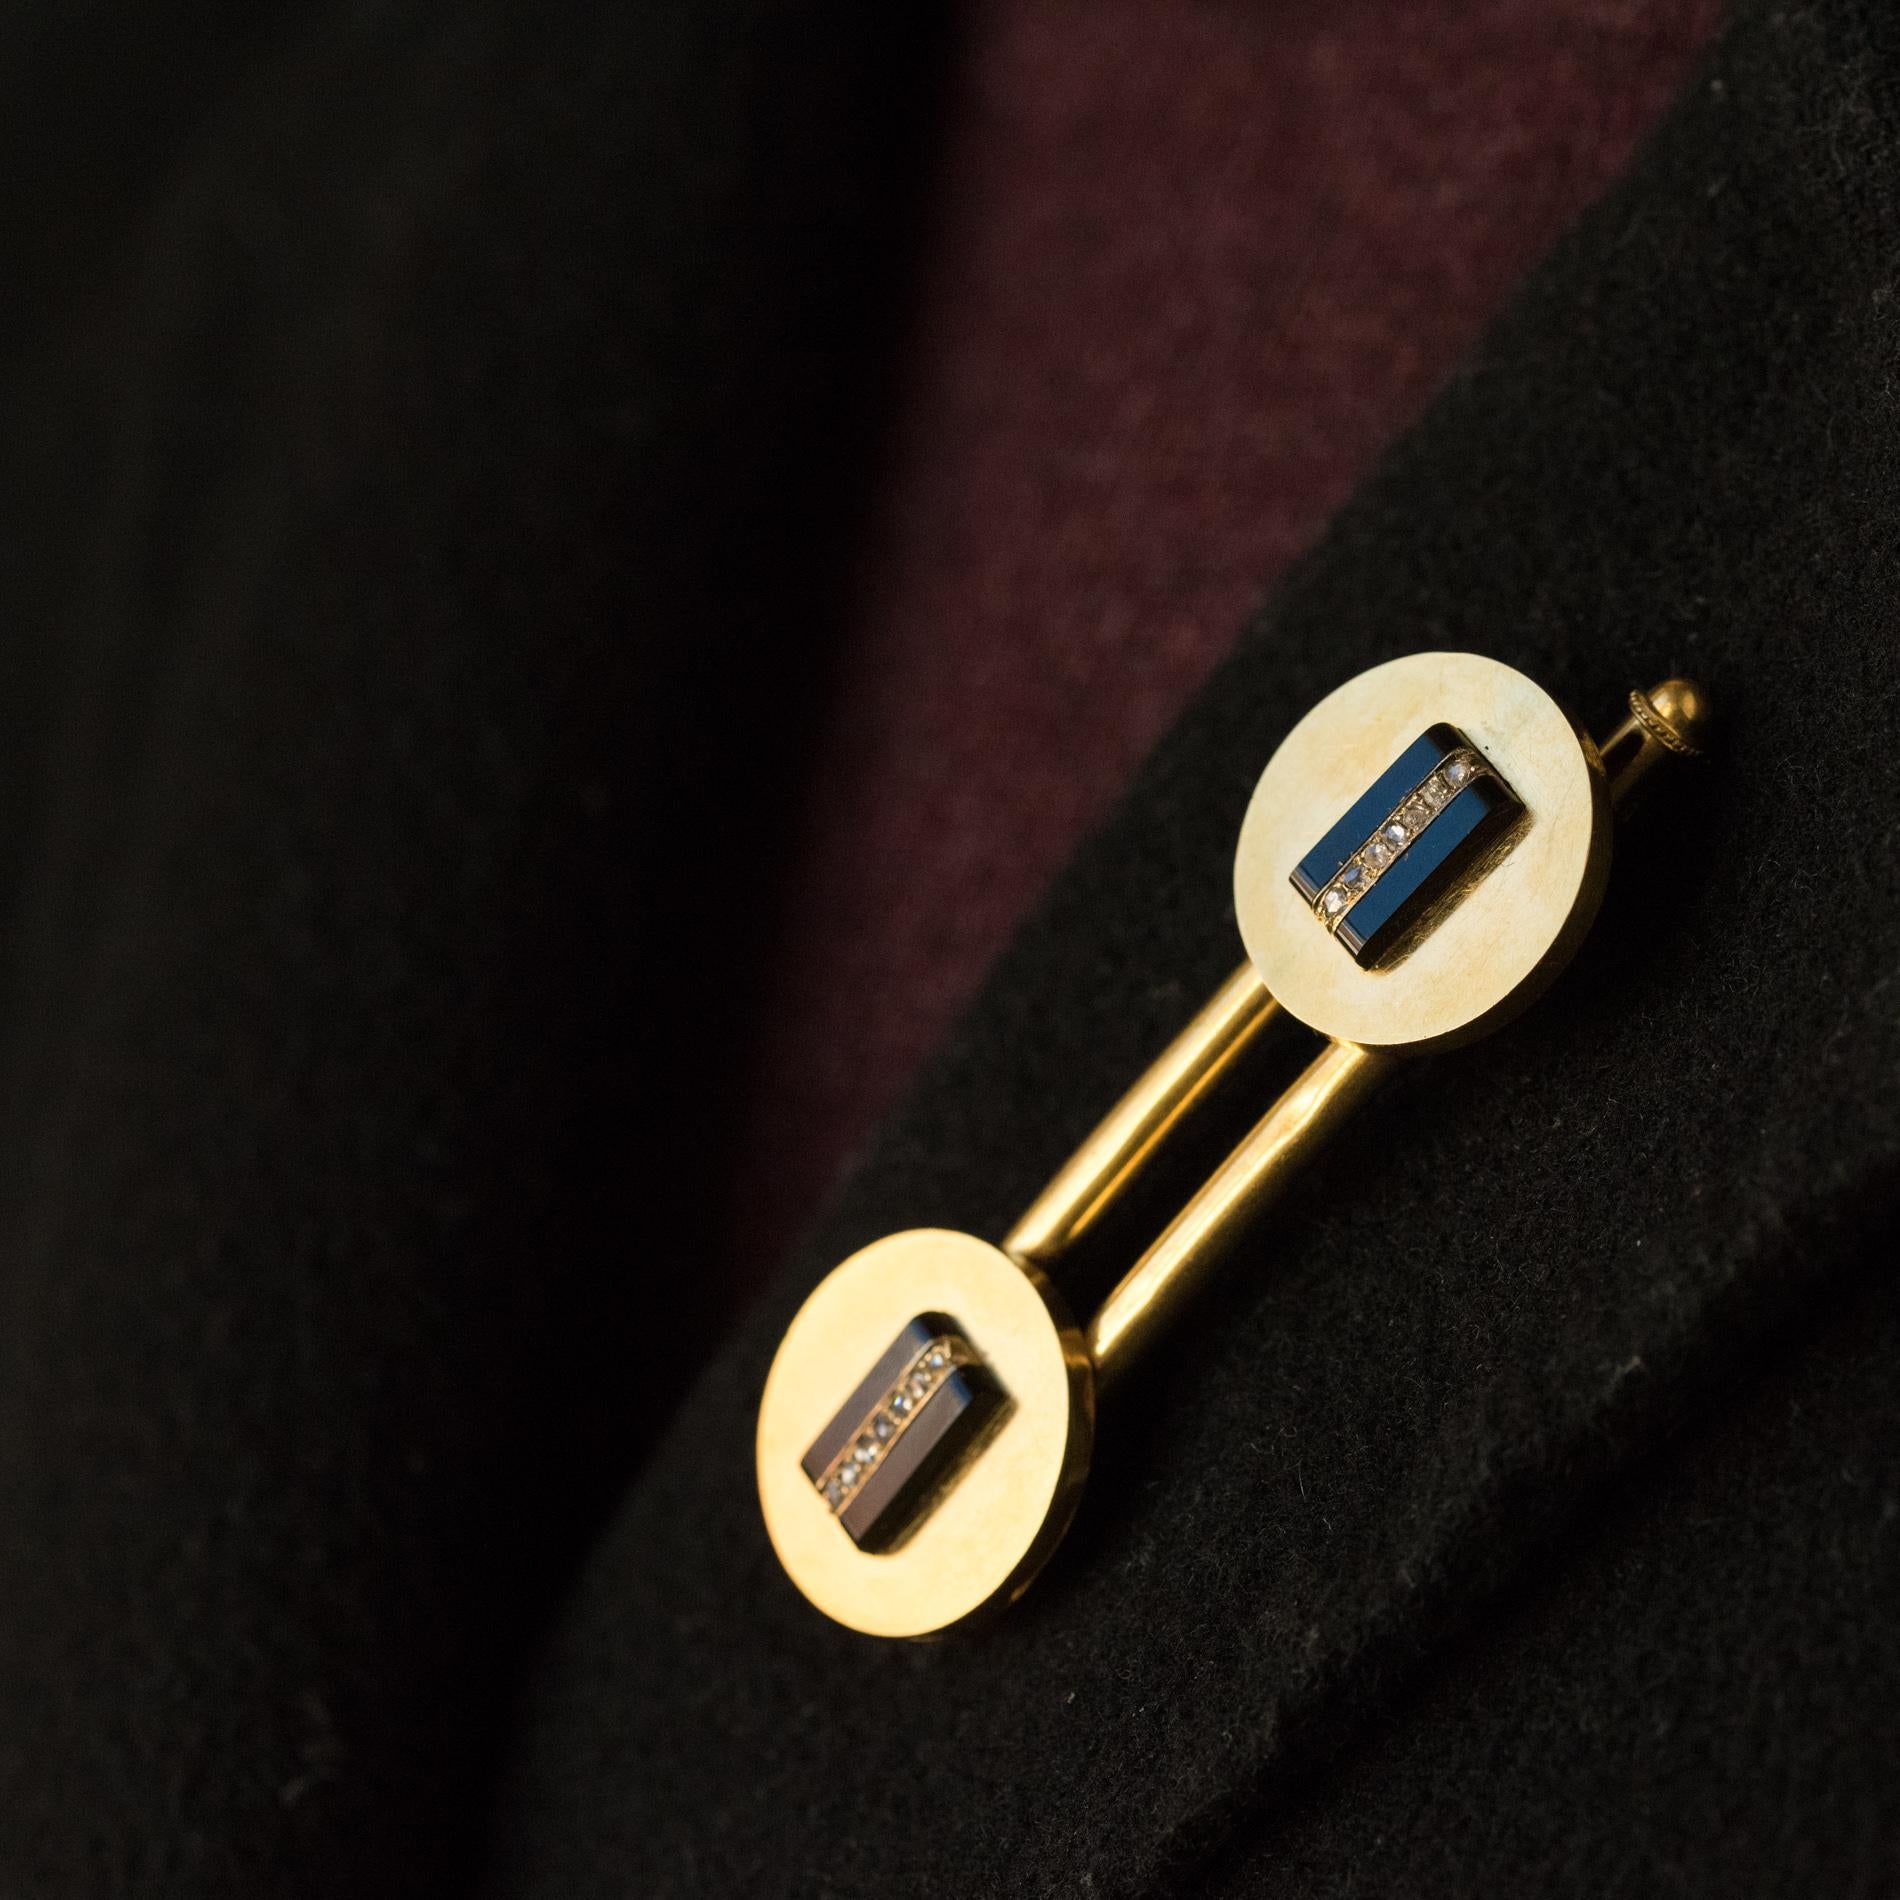 Set in 18 karats yellow gold, eagle's head hallmark.
Composed of a pair of vest buttons and a brooch, this antique jewel of clothing is composed of round-shaped motifs in satin gold set with a bar of onyx each supporting a line of 7 rose- cut